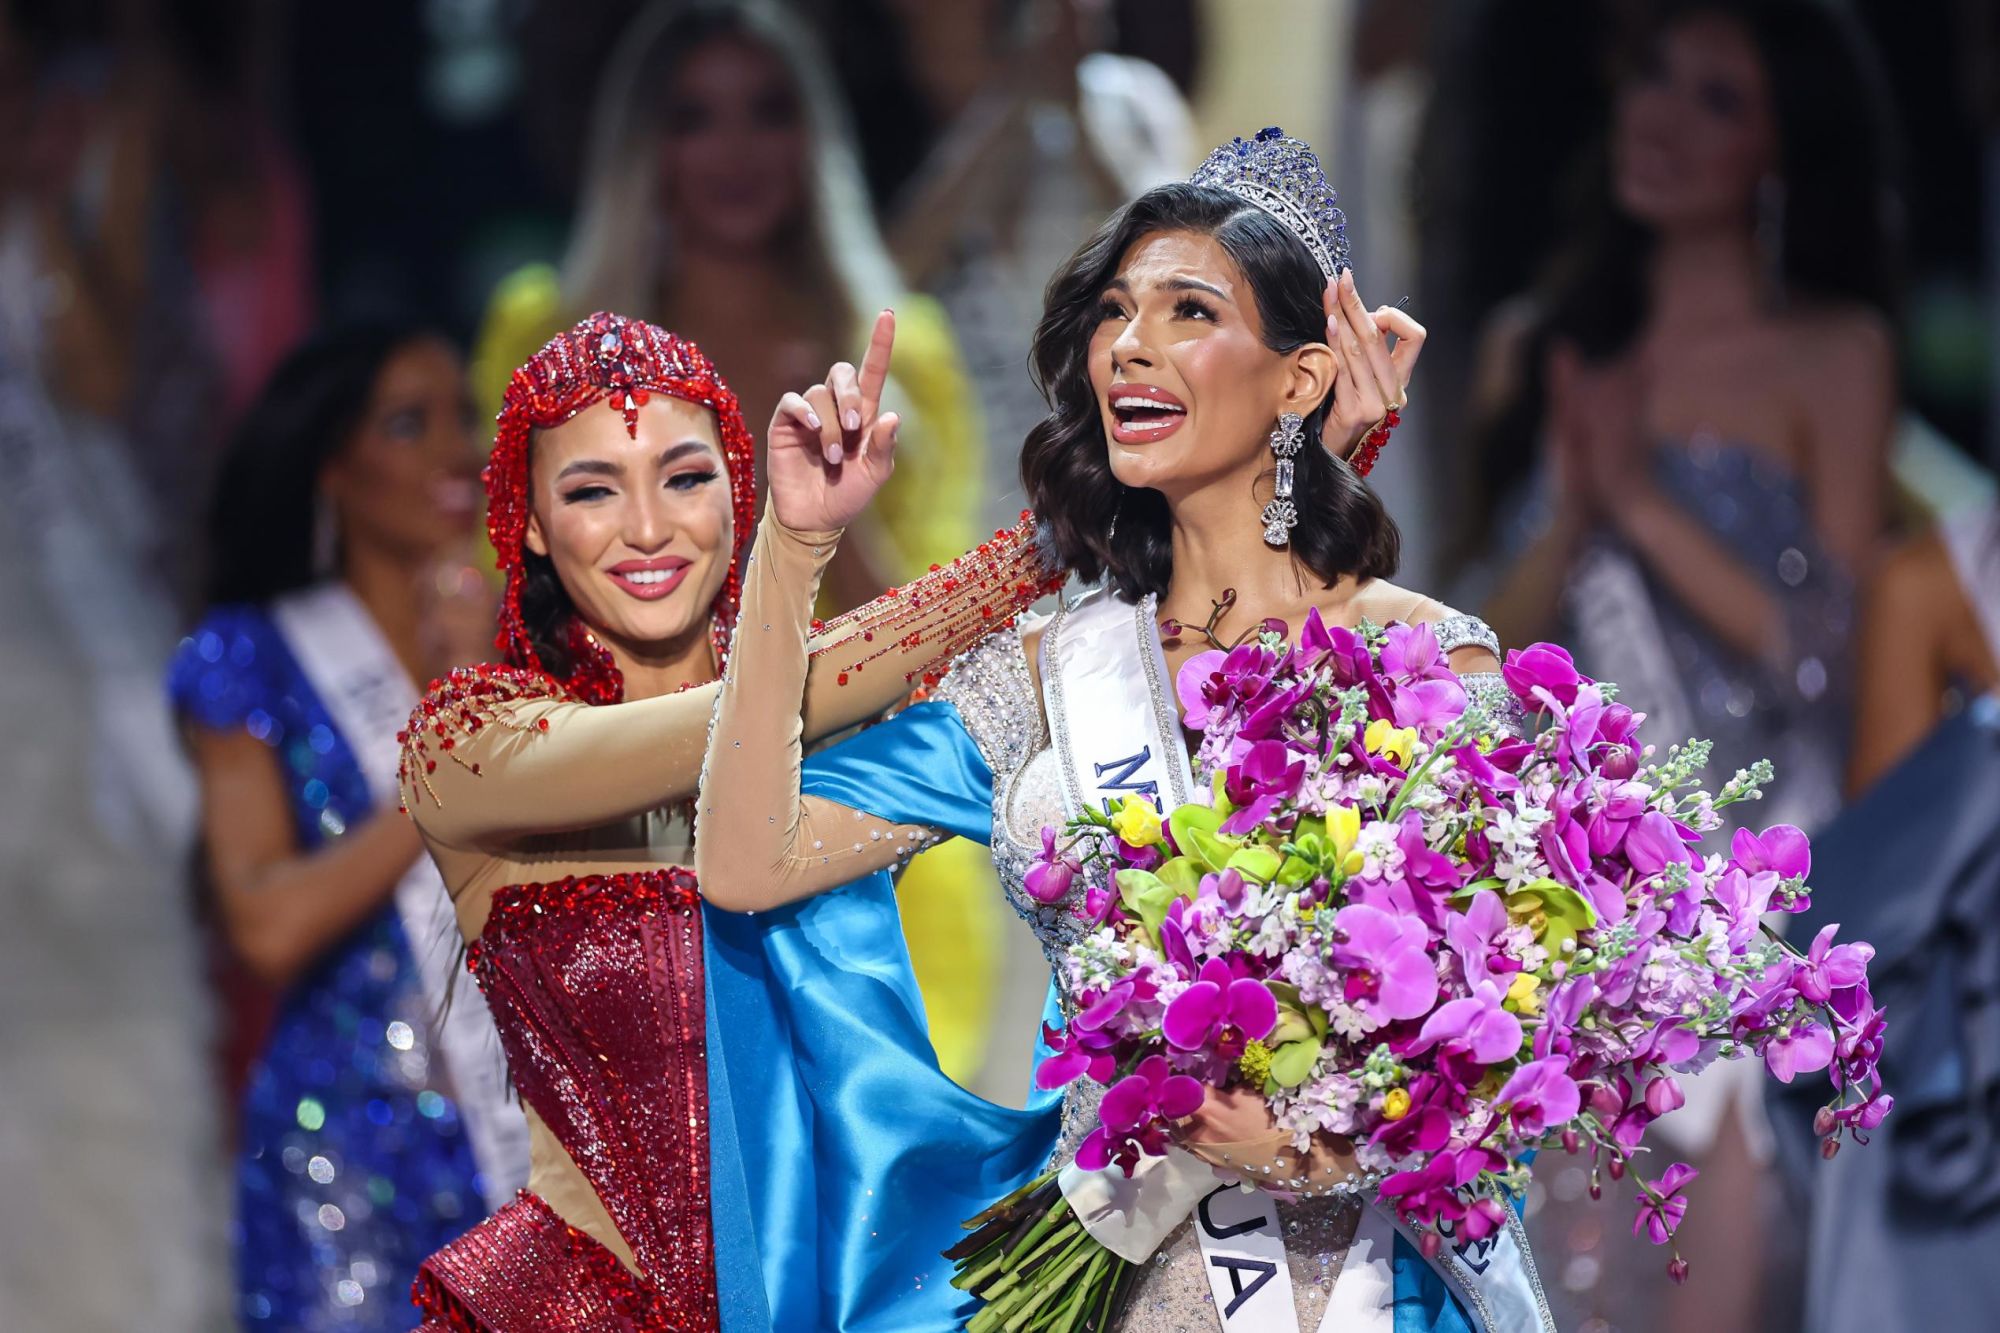 Sheynnis Palacios of Nicaragua is crowned as the 2023 Miss Universe during the 72nd Miss Universe Competition on November 18.